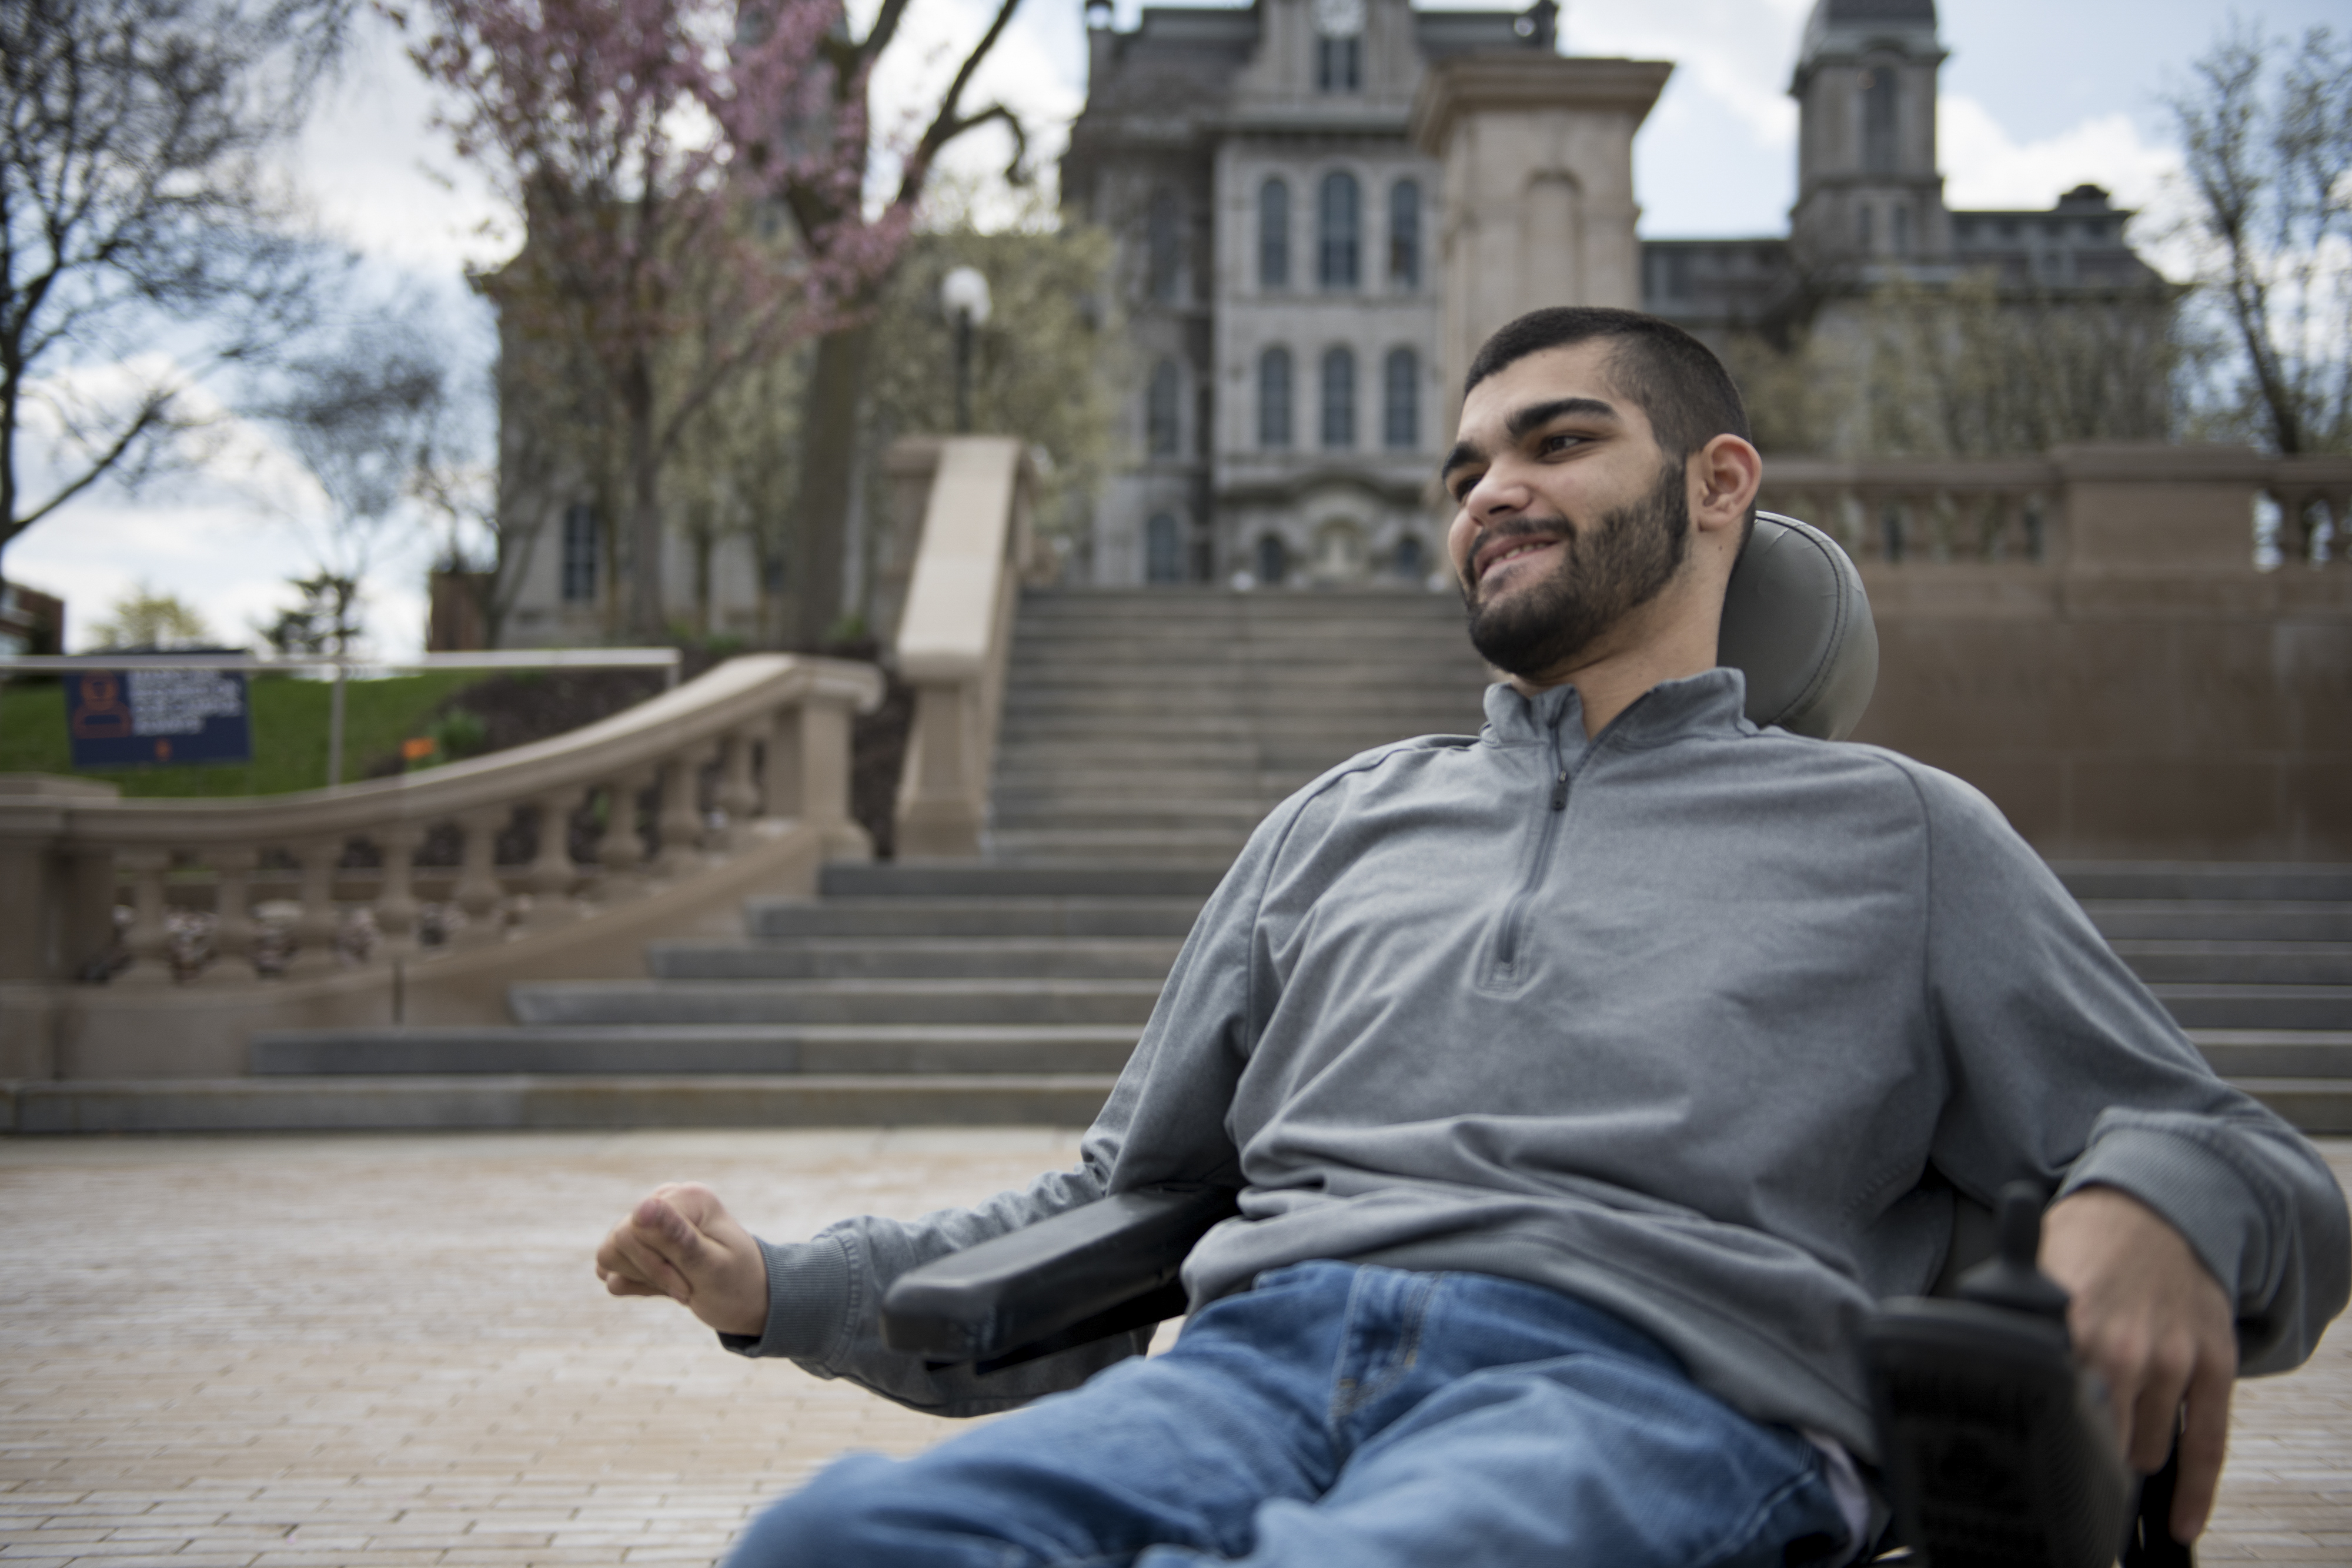 Joey Pagano poses for a portrait in front of the Hall of Languages on the Syracuse University campus. Pagano majors in journalism at the S.I. Newhouse School of Public Communications and is from Fayetteville, NY.